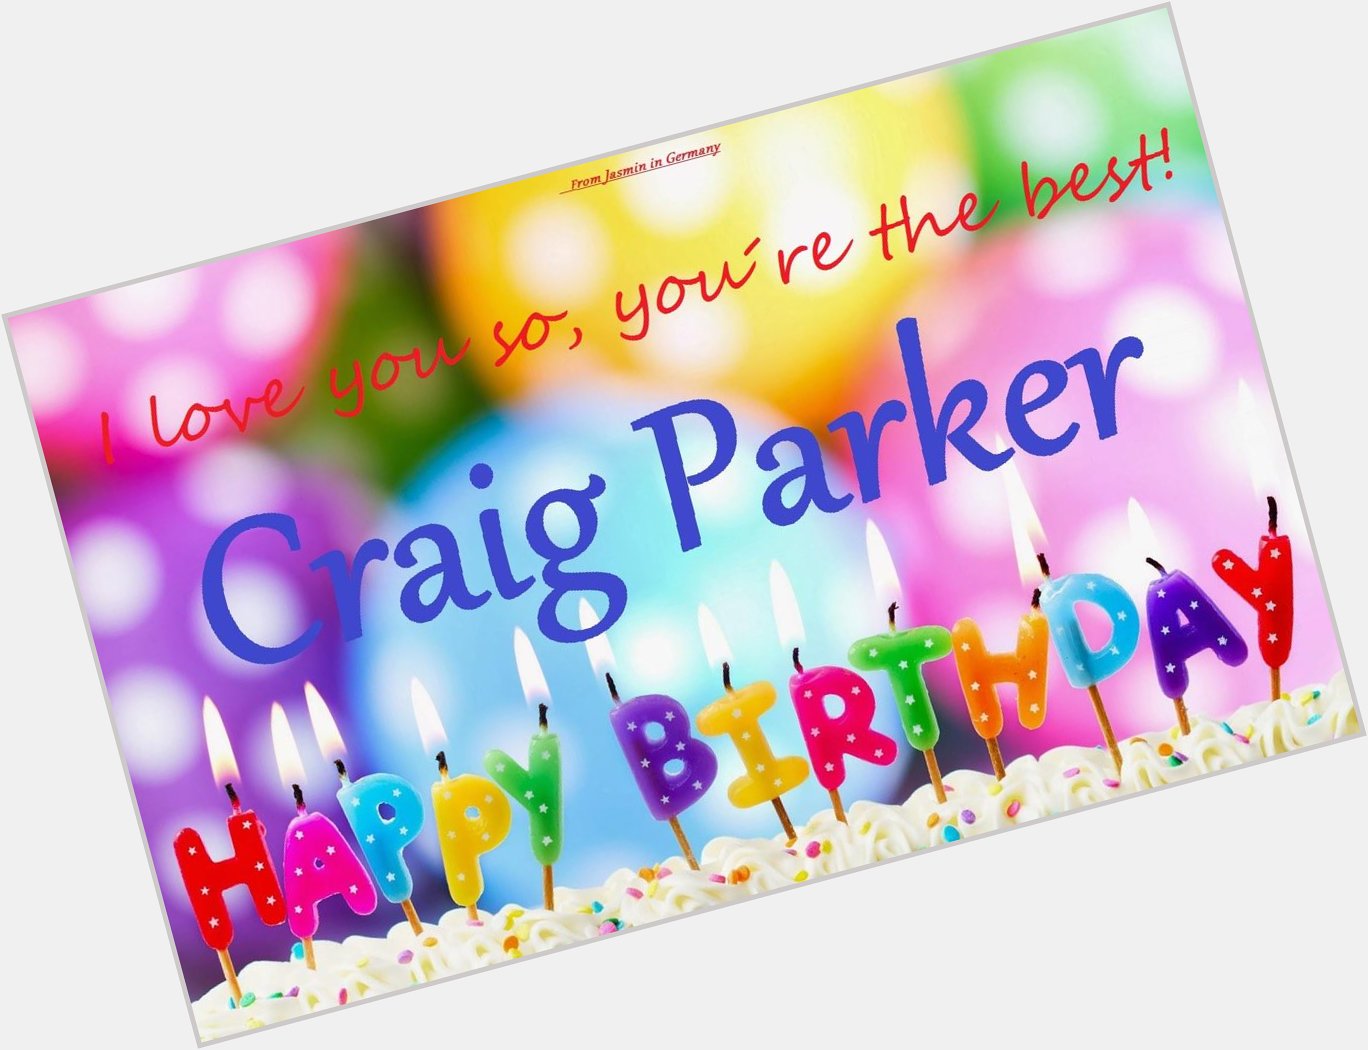 Happy Birthday Craig Parker!Wish you happiness,healthy and fun at all your living days!And have a  nice,funny B-day! 